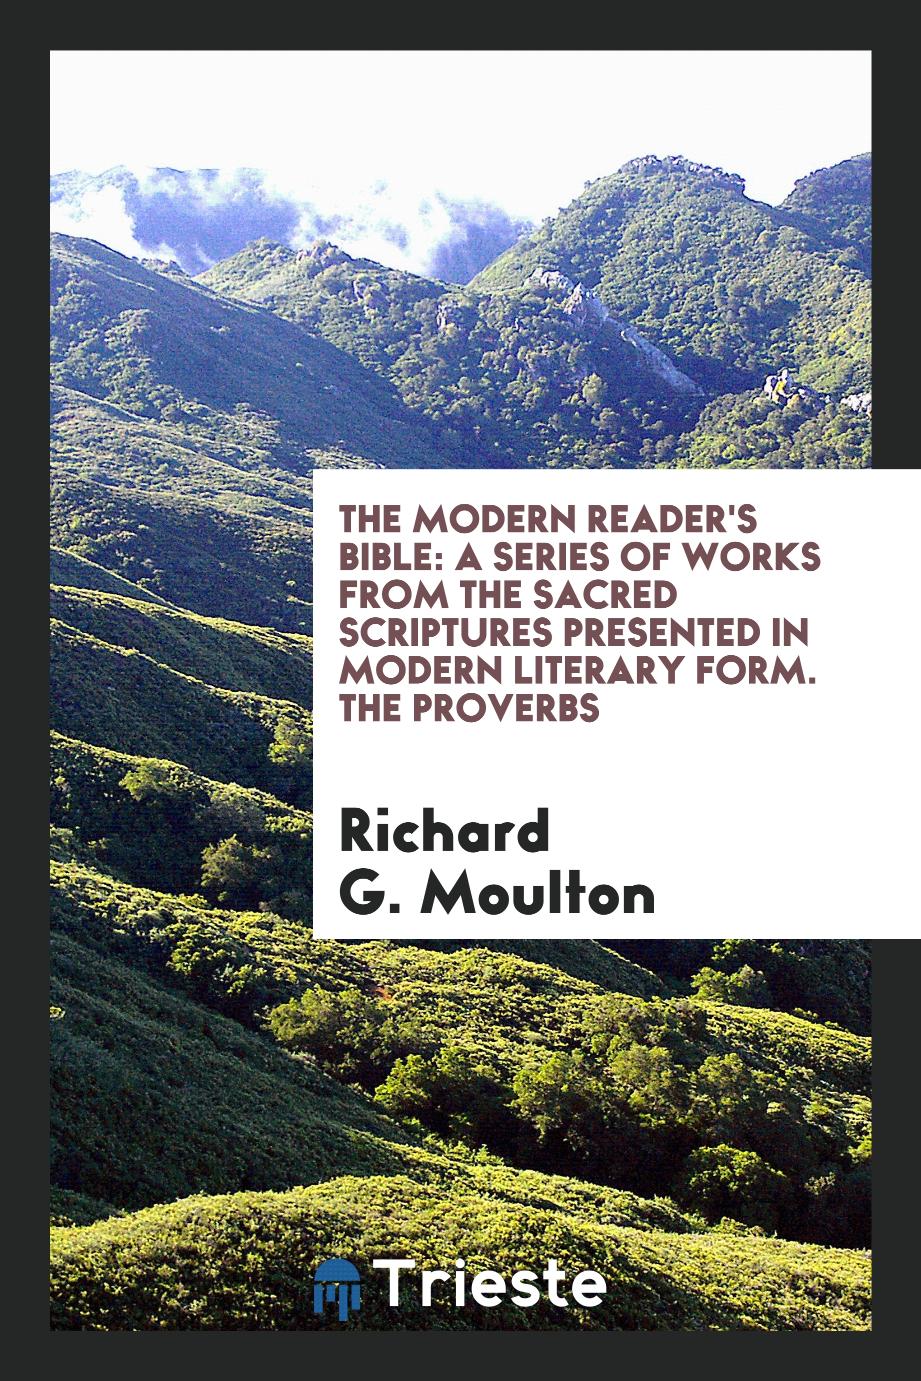 The modern reader's Bible: a series of works from the sacred Scriptures presented in modern literary form. The proverbs